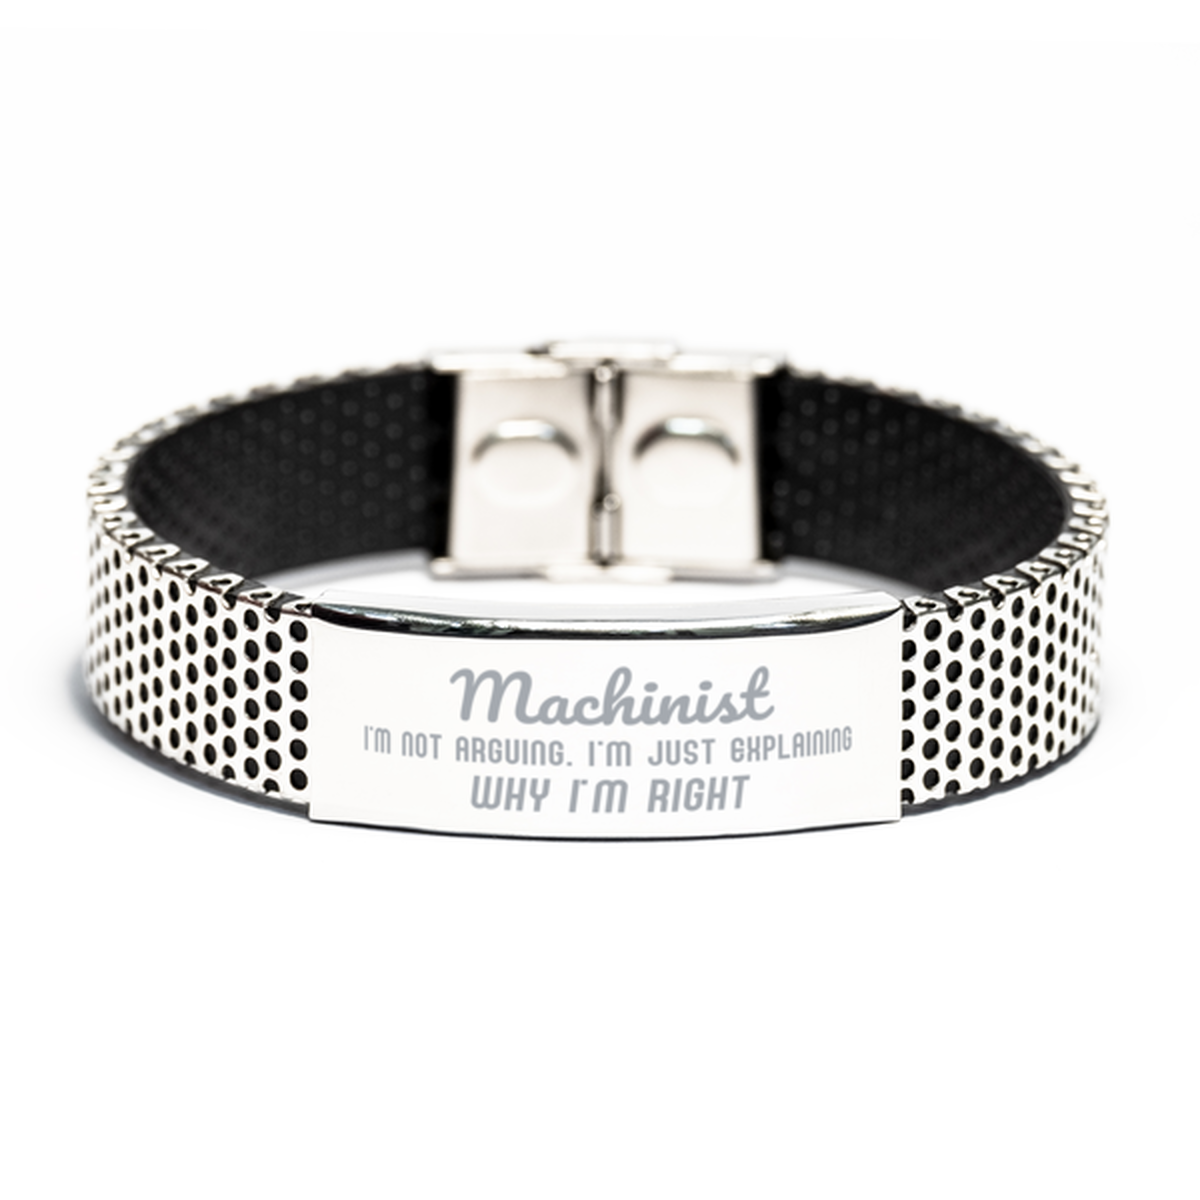 Machinist I'm not Arguing. I'm Just Explaining Why I'm RIGHT Stainless Steel Bracelet, Funny Saying Quote Machinist Gifts For Machinist Graduation Birthday Christmas Gifts for Men Women Coworker